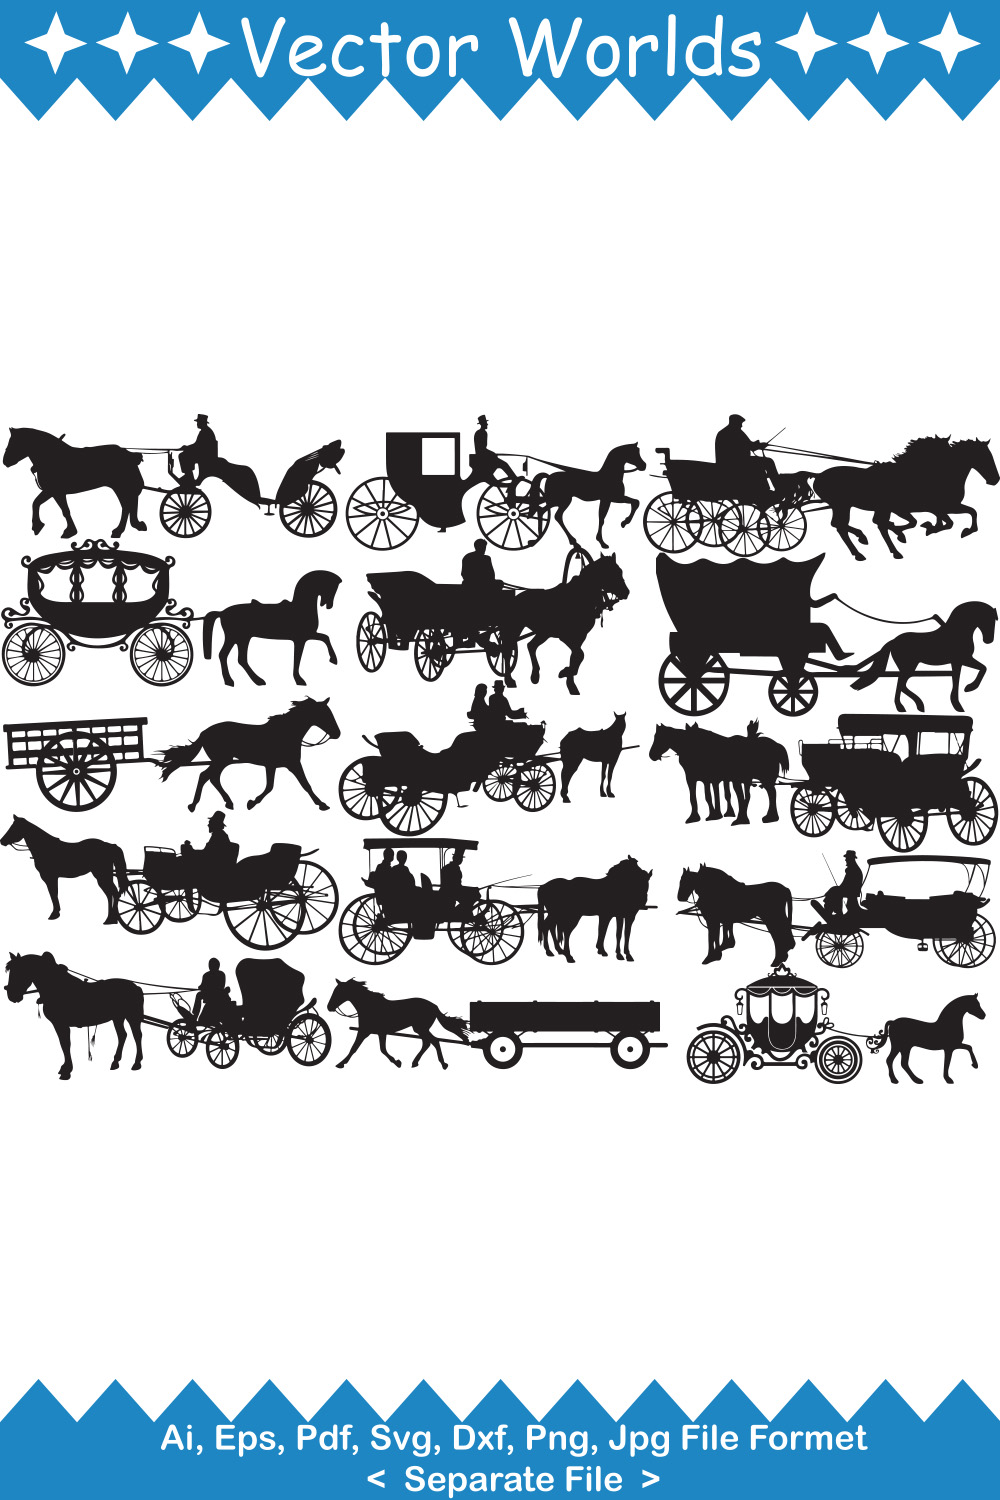 A selection of amazing vector images of carriages.